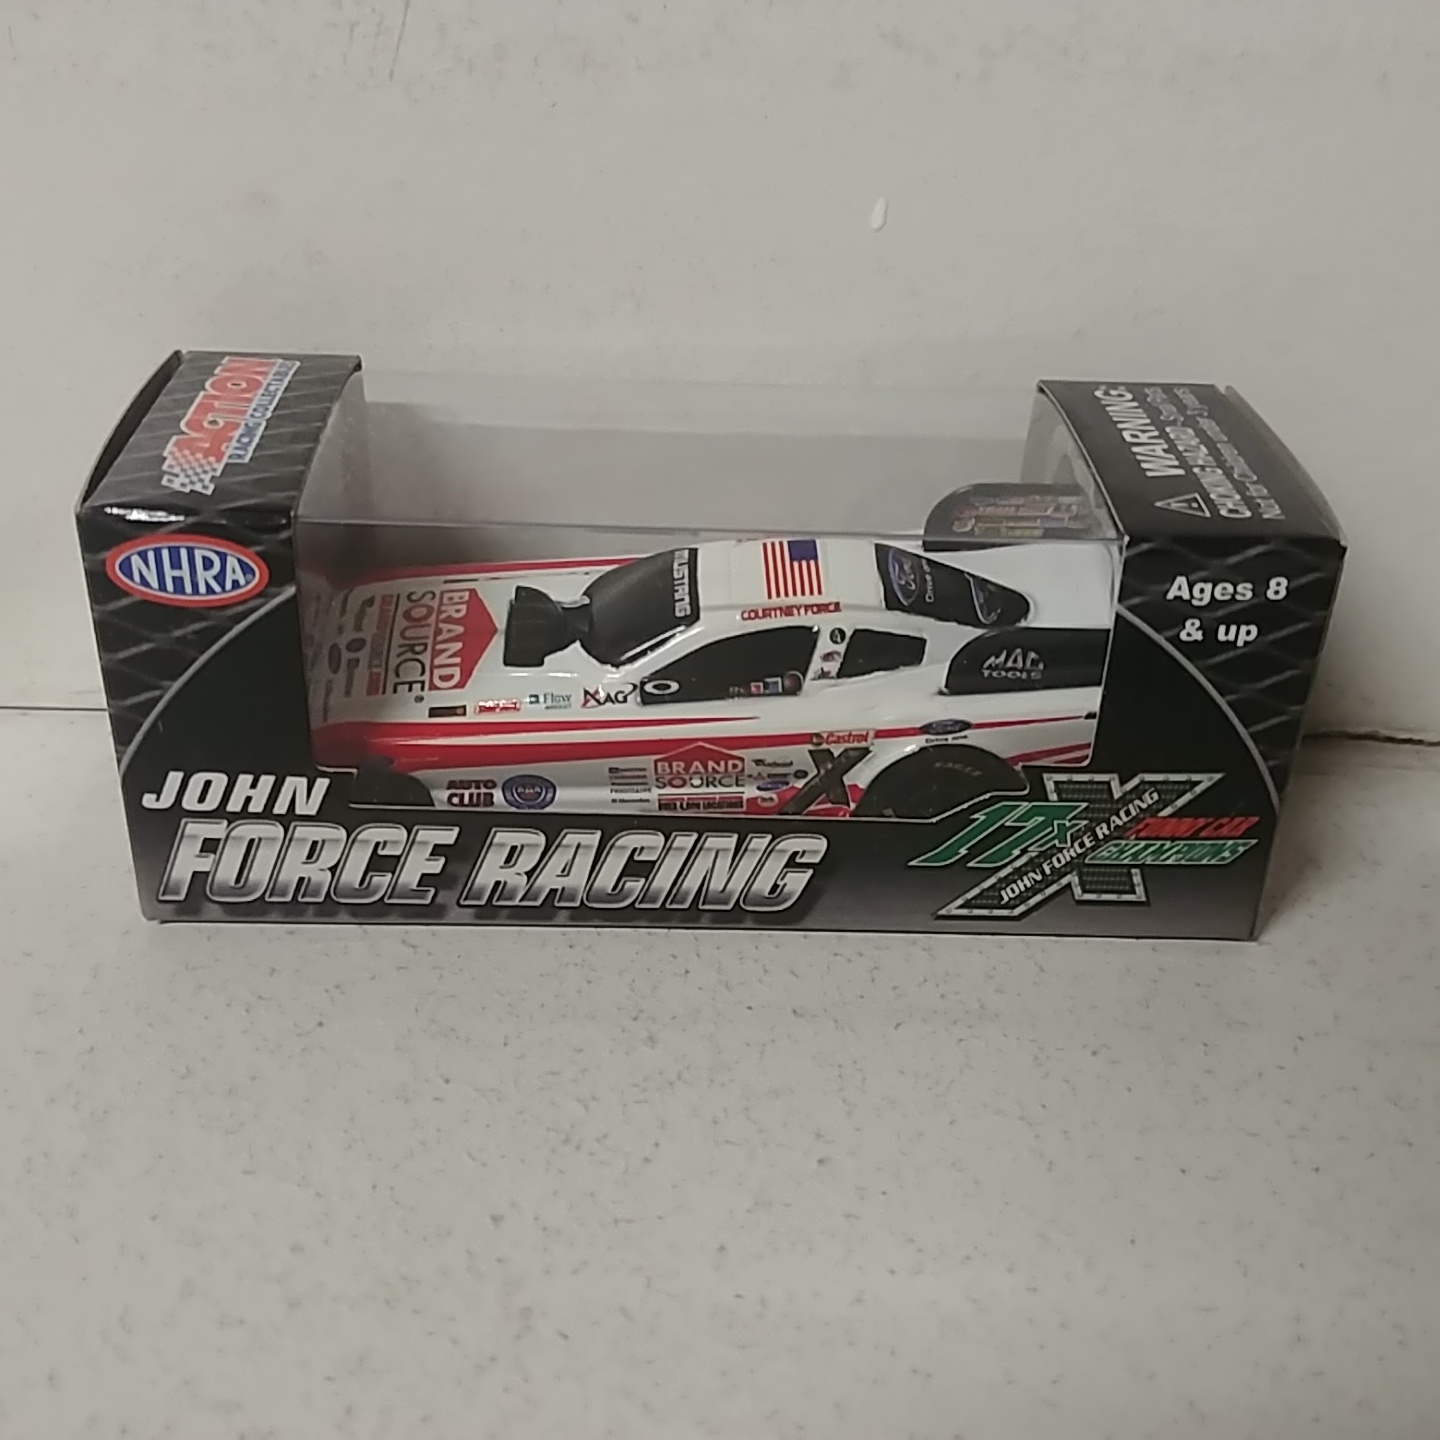 2011 Courtney Force 1/64th Brand Source Mustang funny car